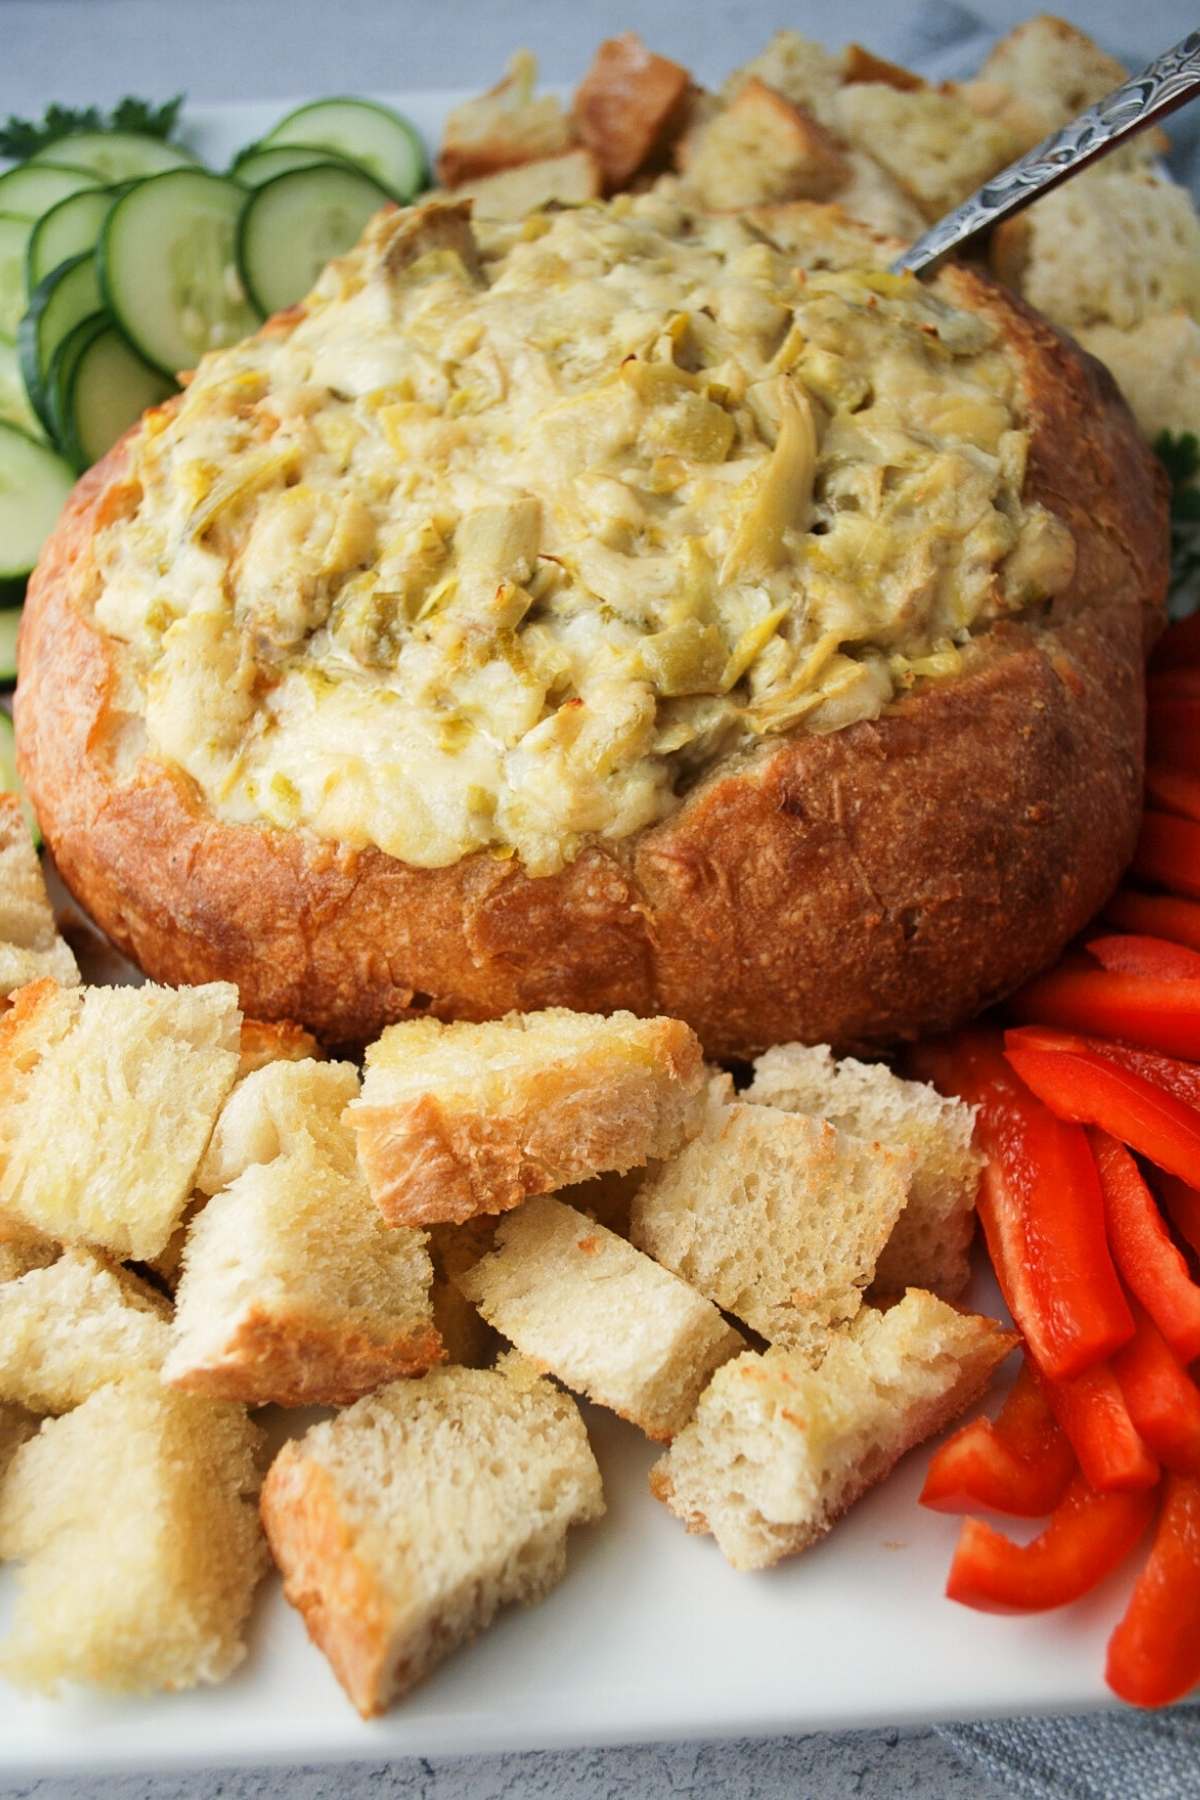 artichoke dip baked in a bread bowl with bread cubes and veggies